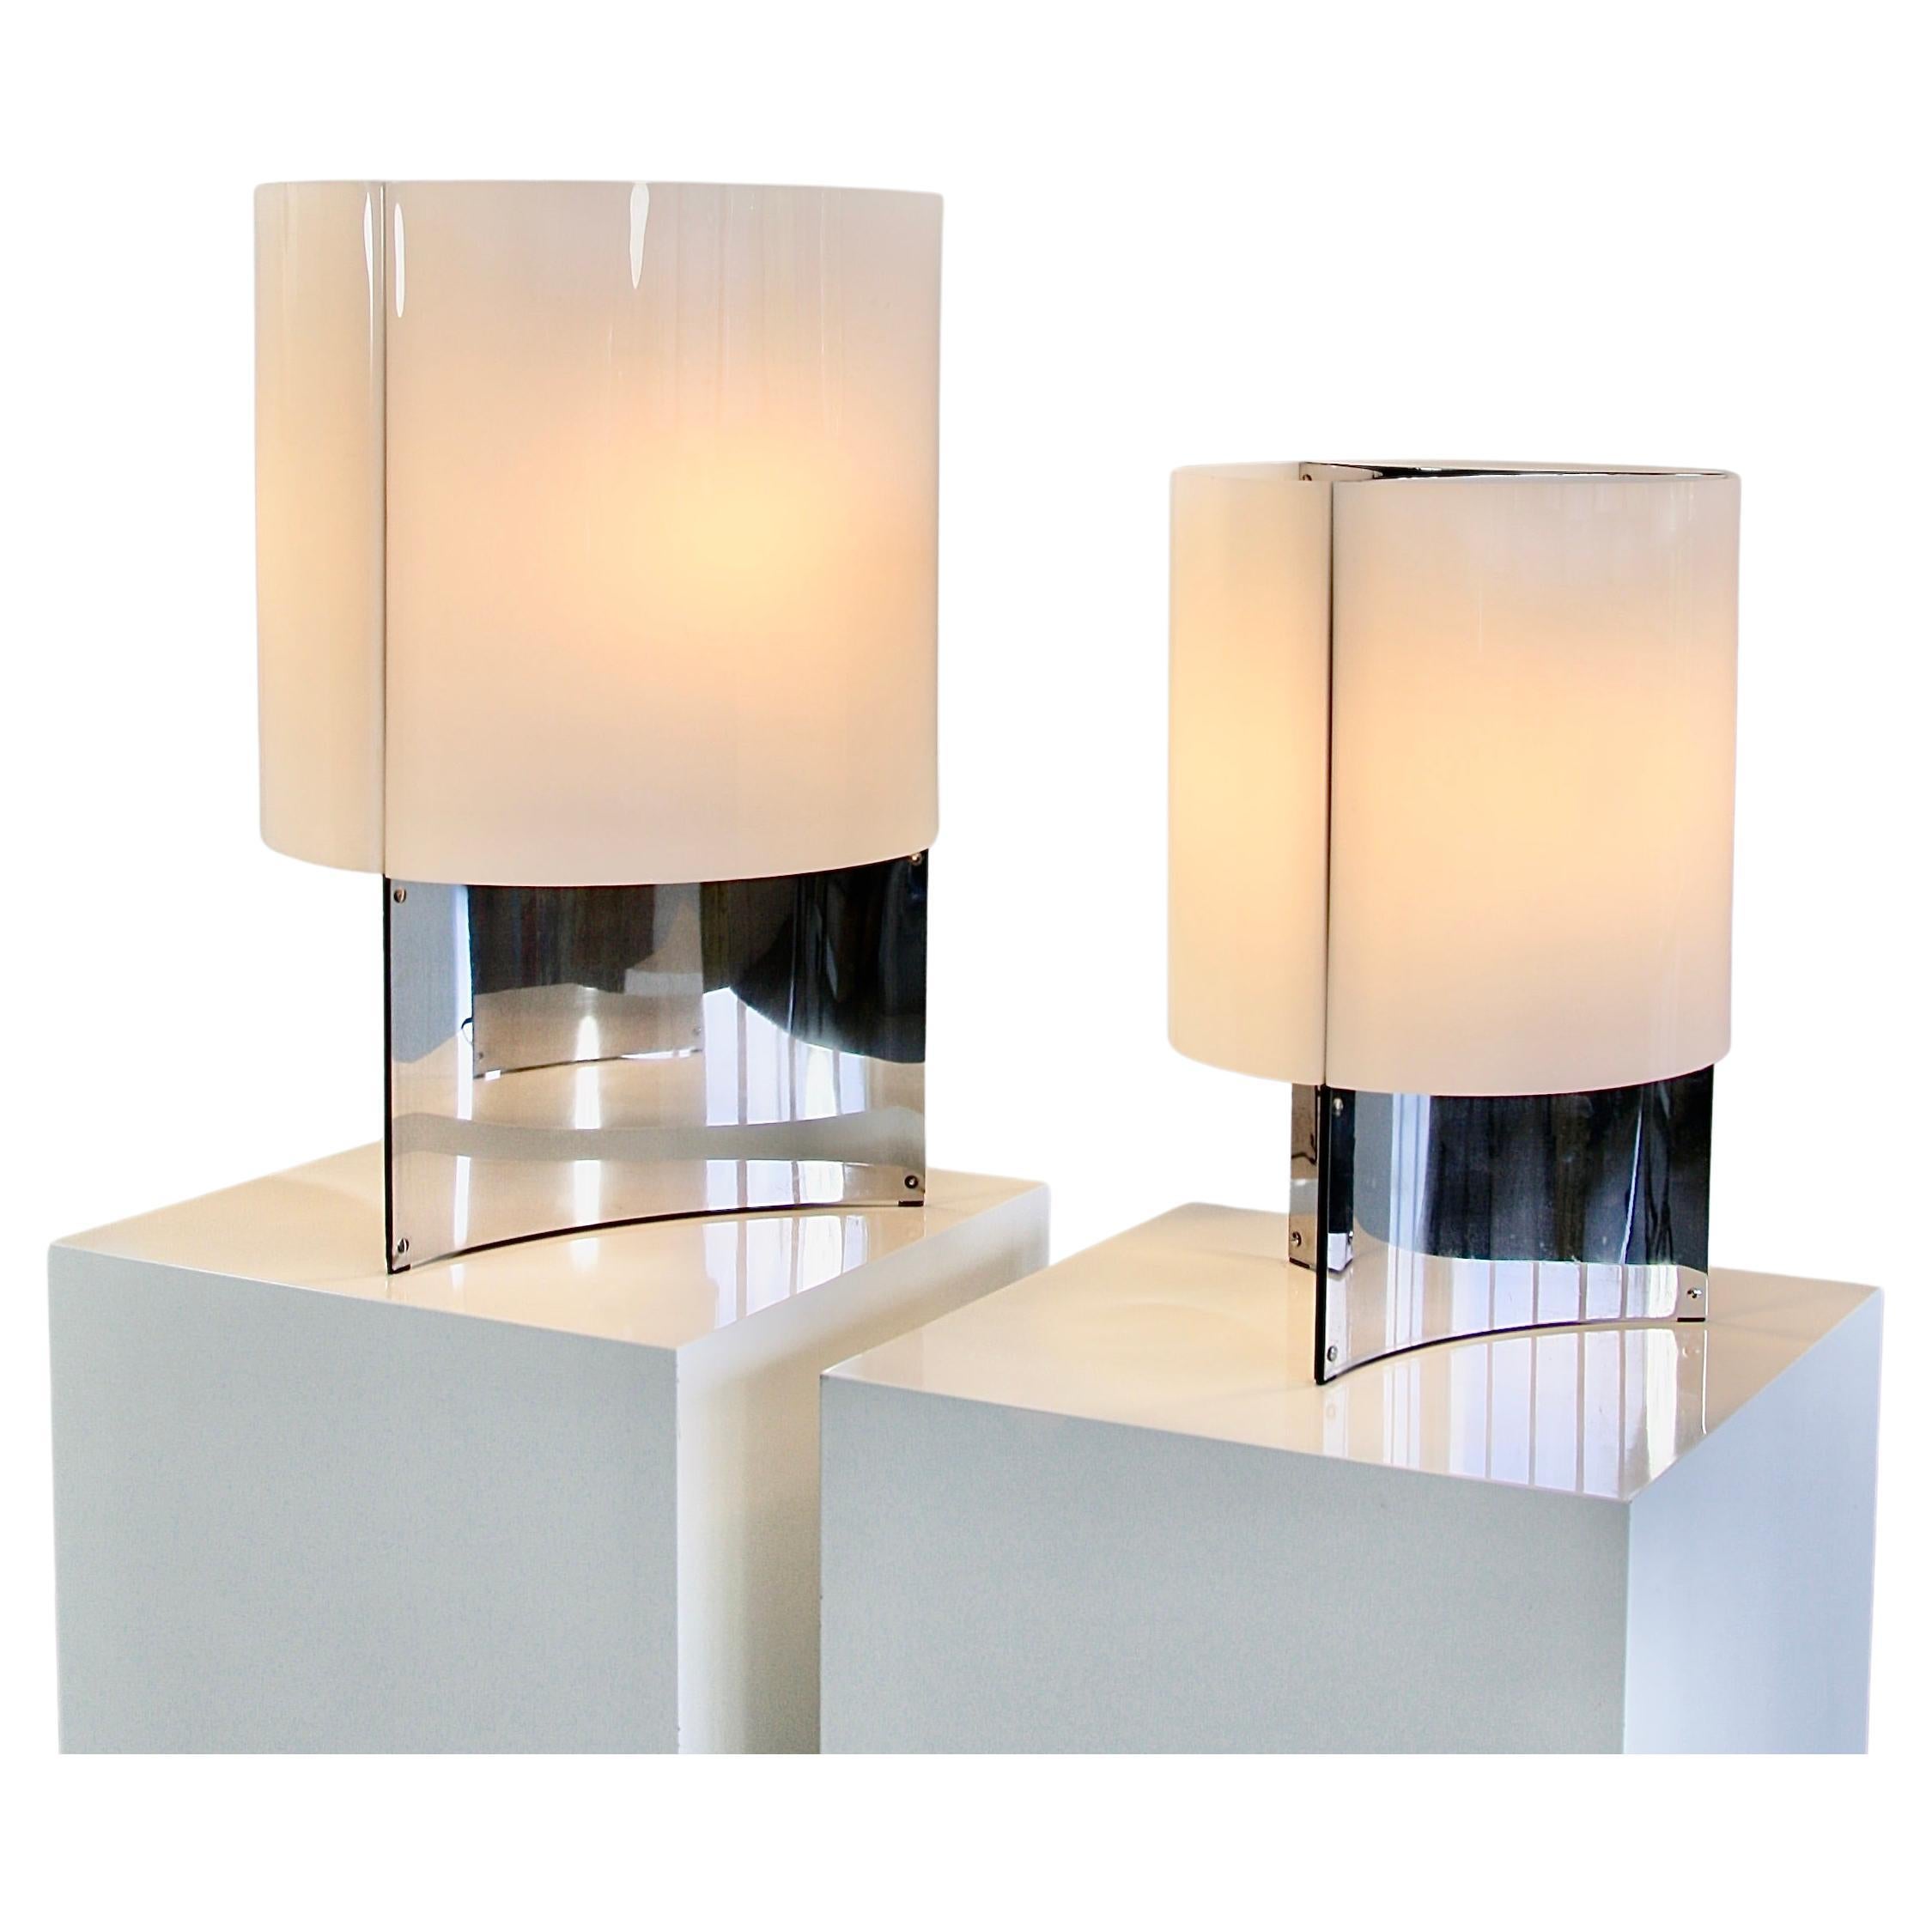 Early models of the small and large table lamps (526 & 526G), designed by Massimo Vignelli. Italy, Arteluce, 1965.

Chromed metal base with opaque perspex diffuser, divided into three sections. Each lamp with 3 light sockets. Original label